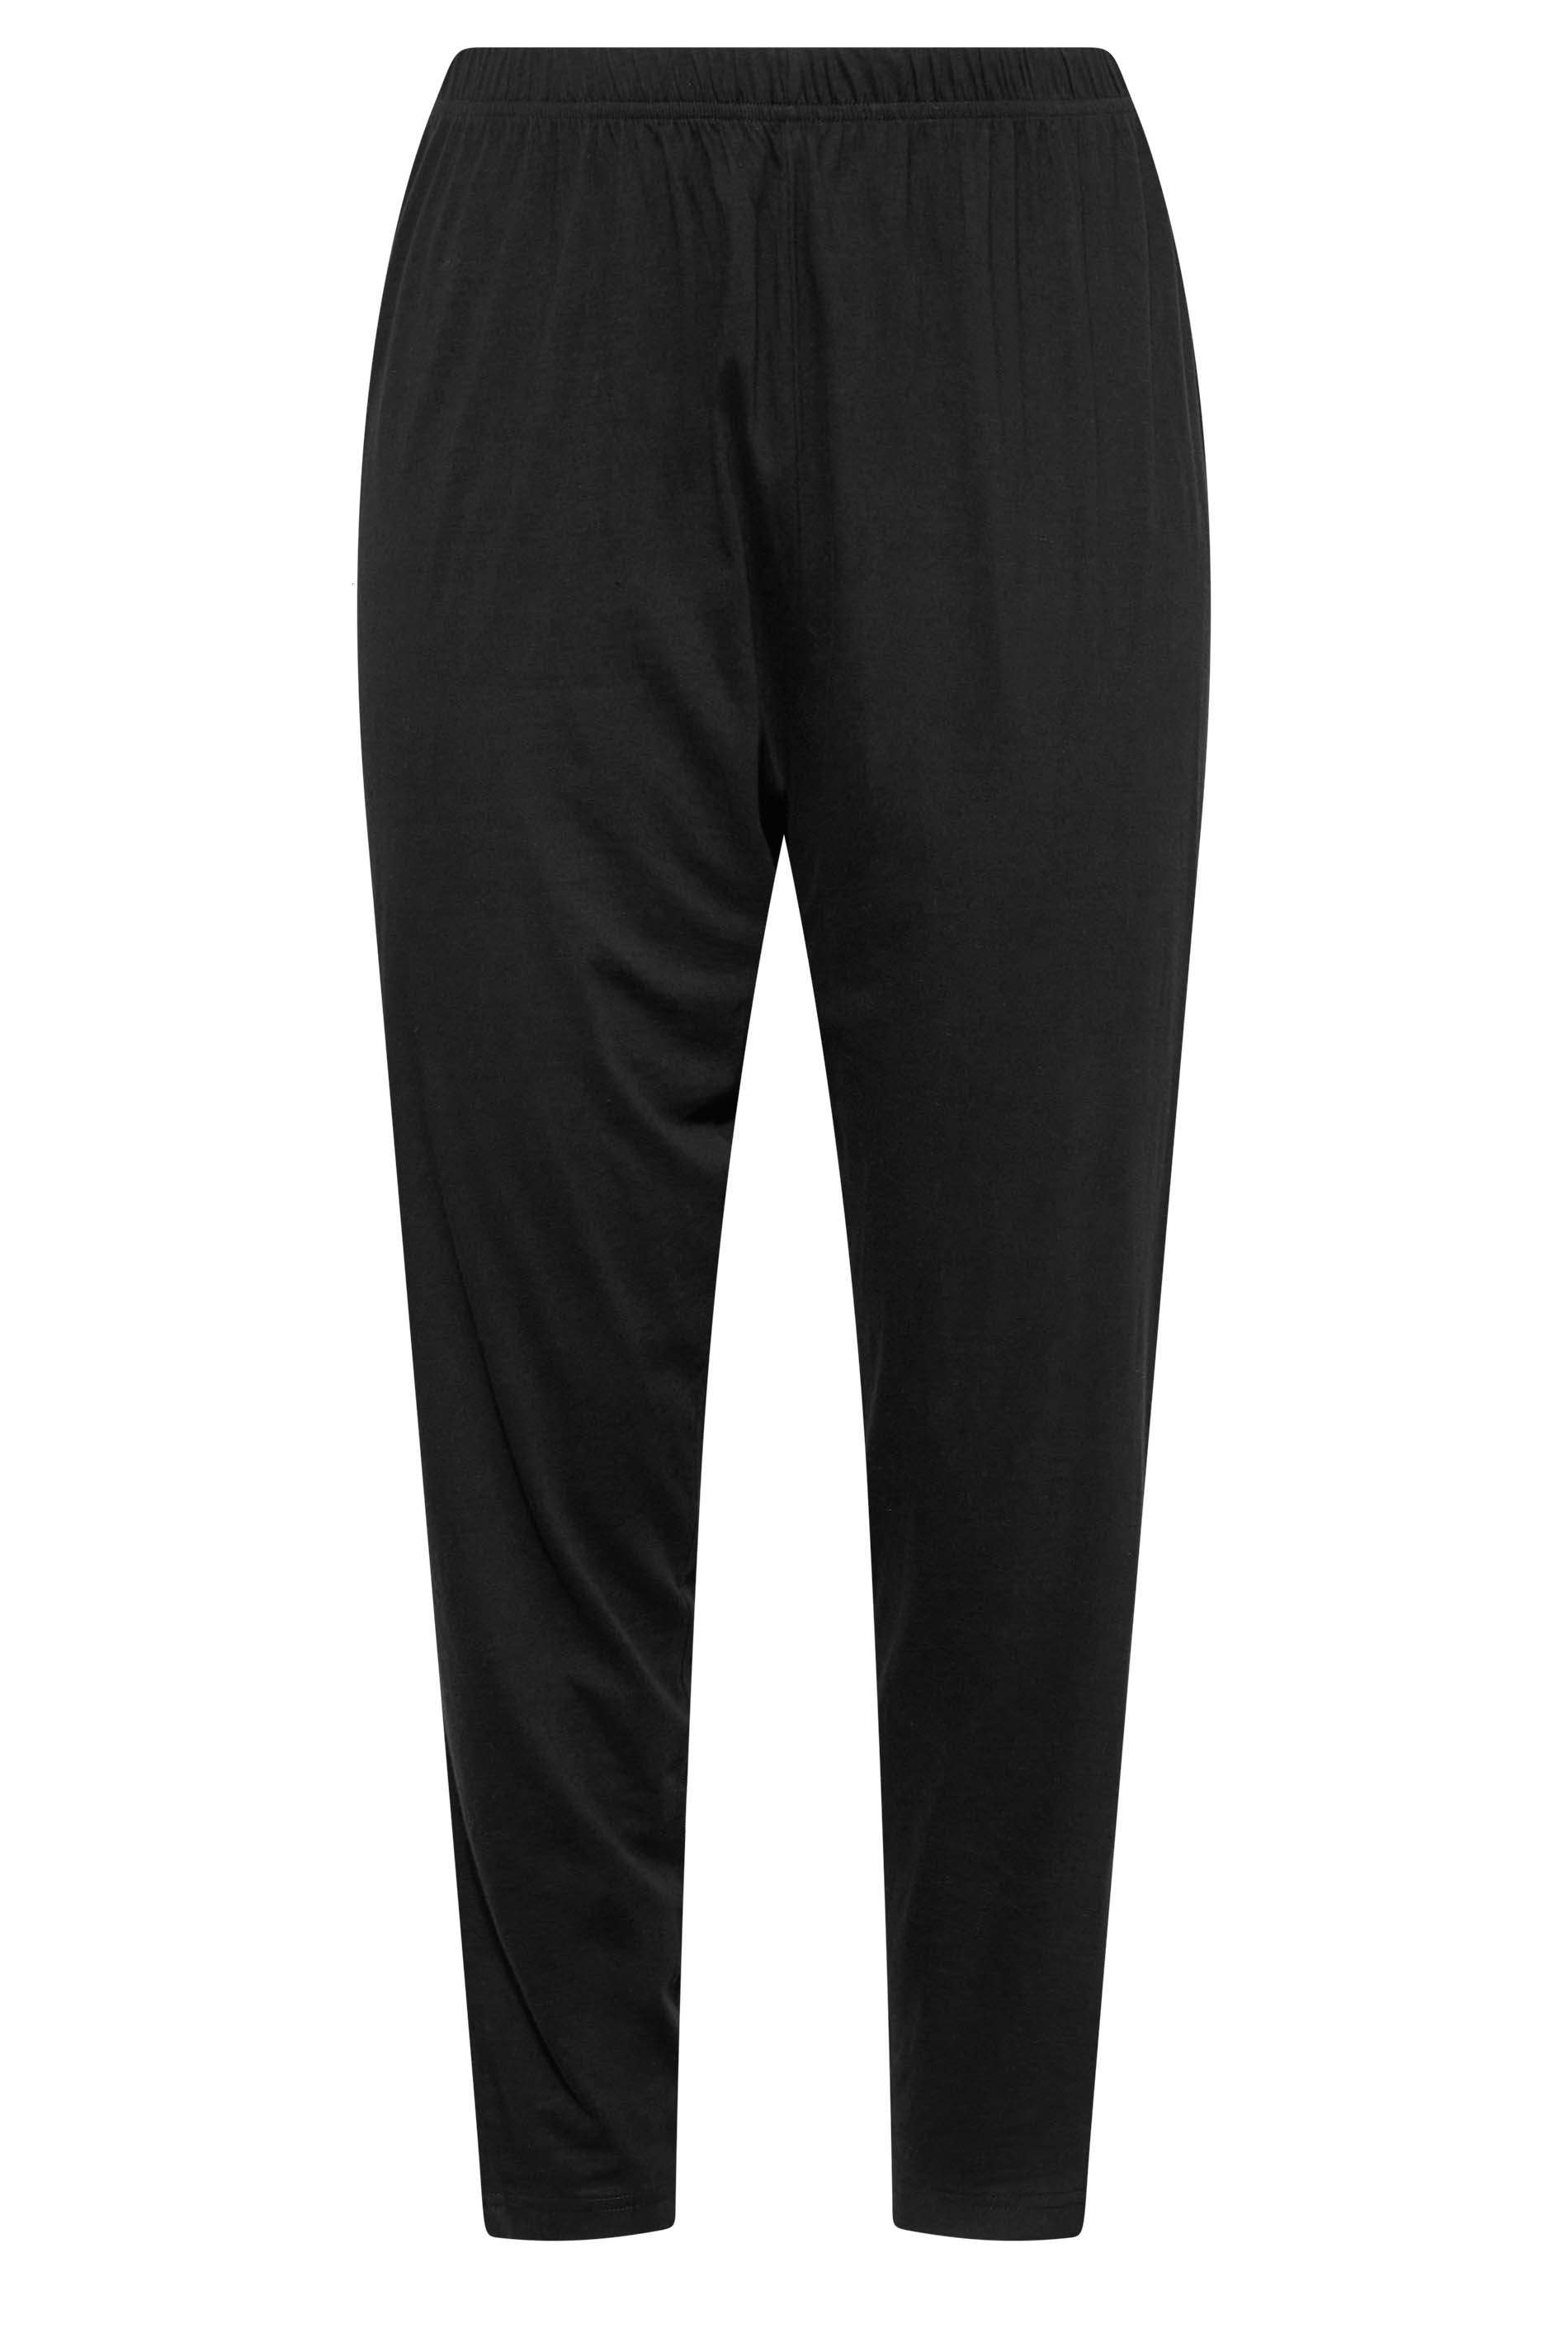 Plus Size Black Tapered Pyjama Bottoms | Yours Clothing